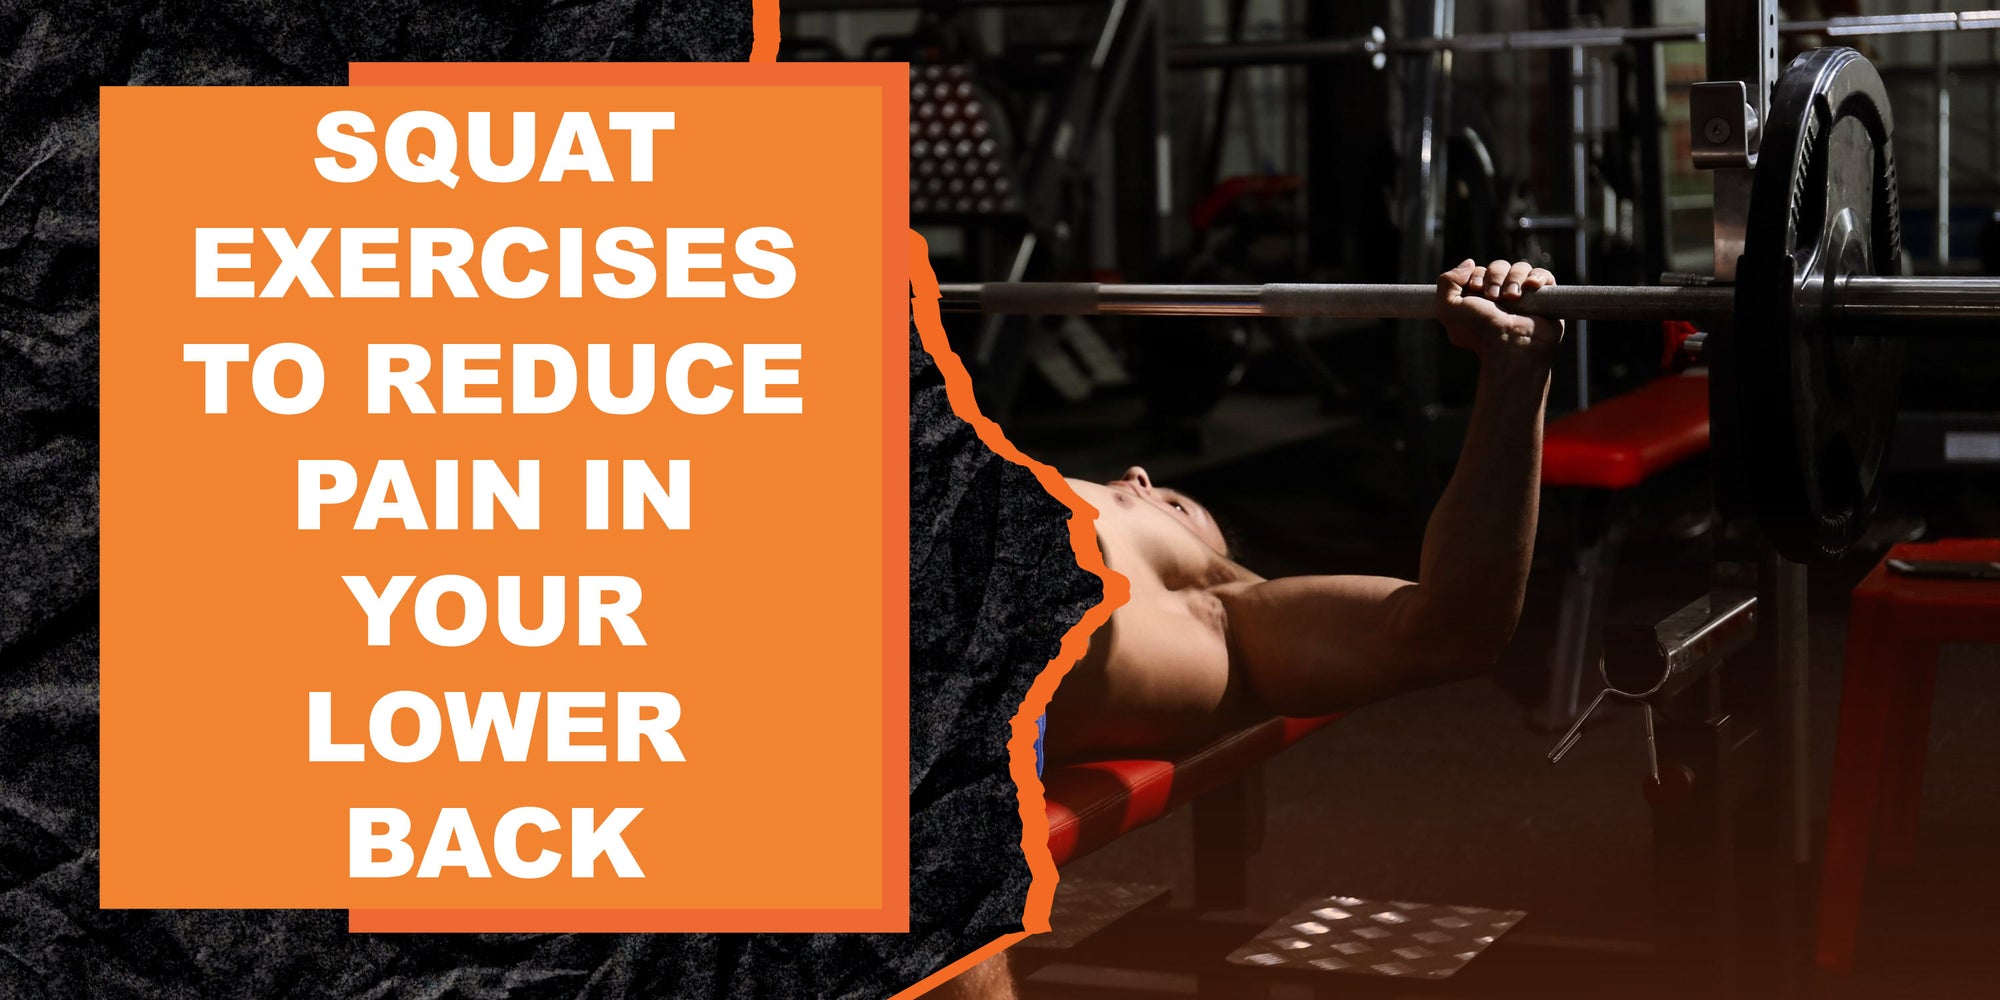 Squat Exercises to Reduce Pain in Your Lower Back